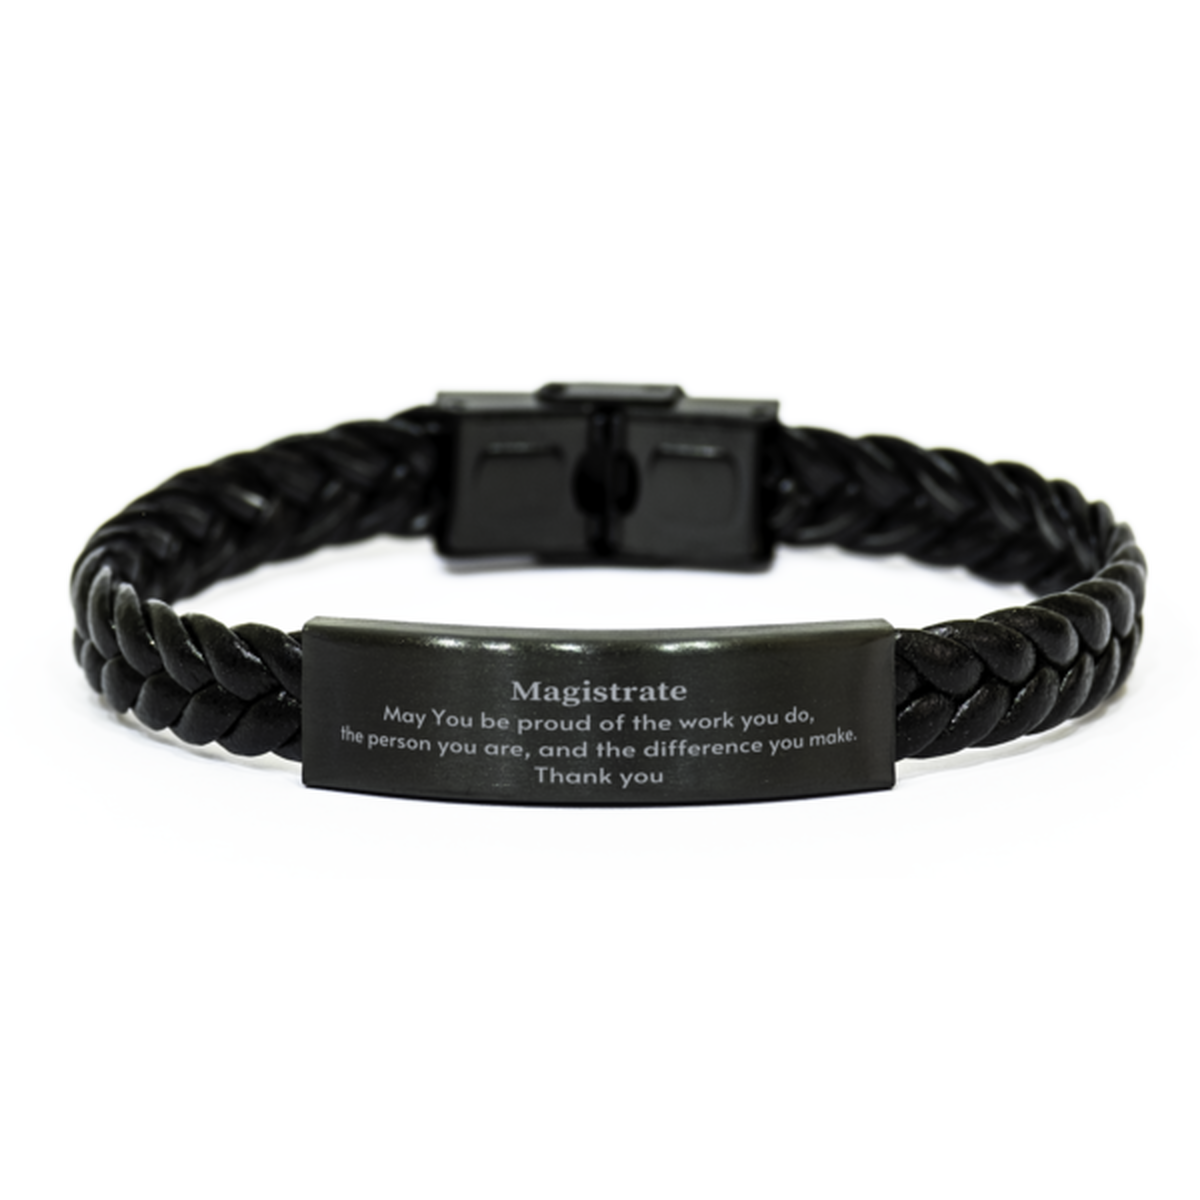 Heartwarming Braided Leather Bracelet Retirement Coworkers Gifts for Magistrate, Magistrate May You be proud of the work you do, the person you are Gifts for Boss Men Women Friends